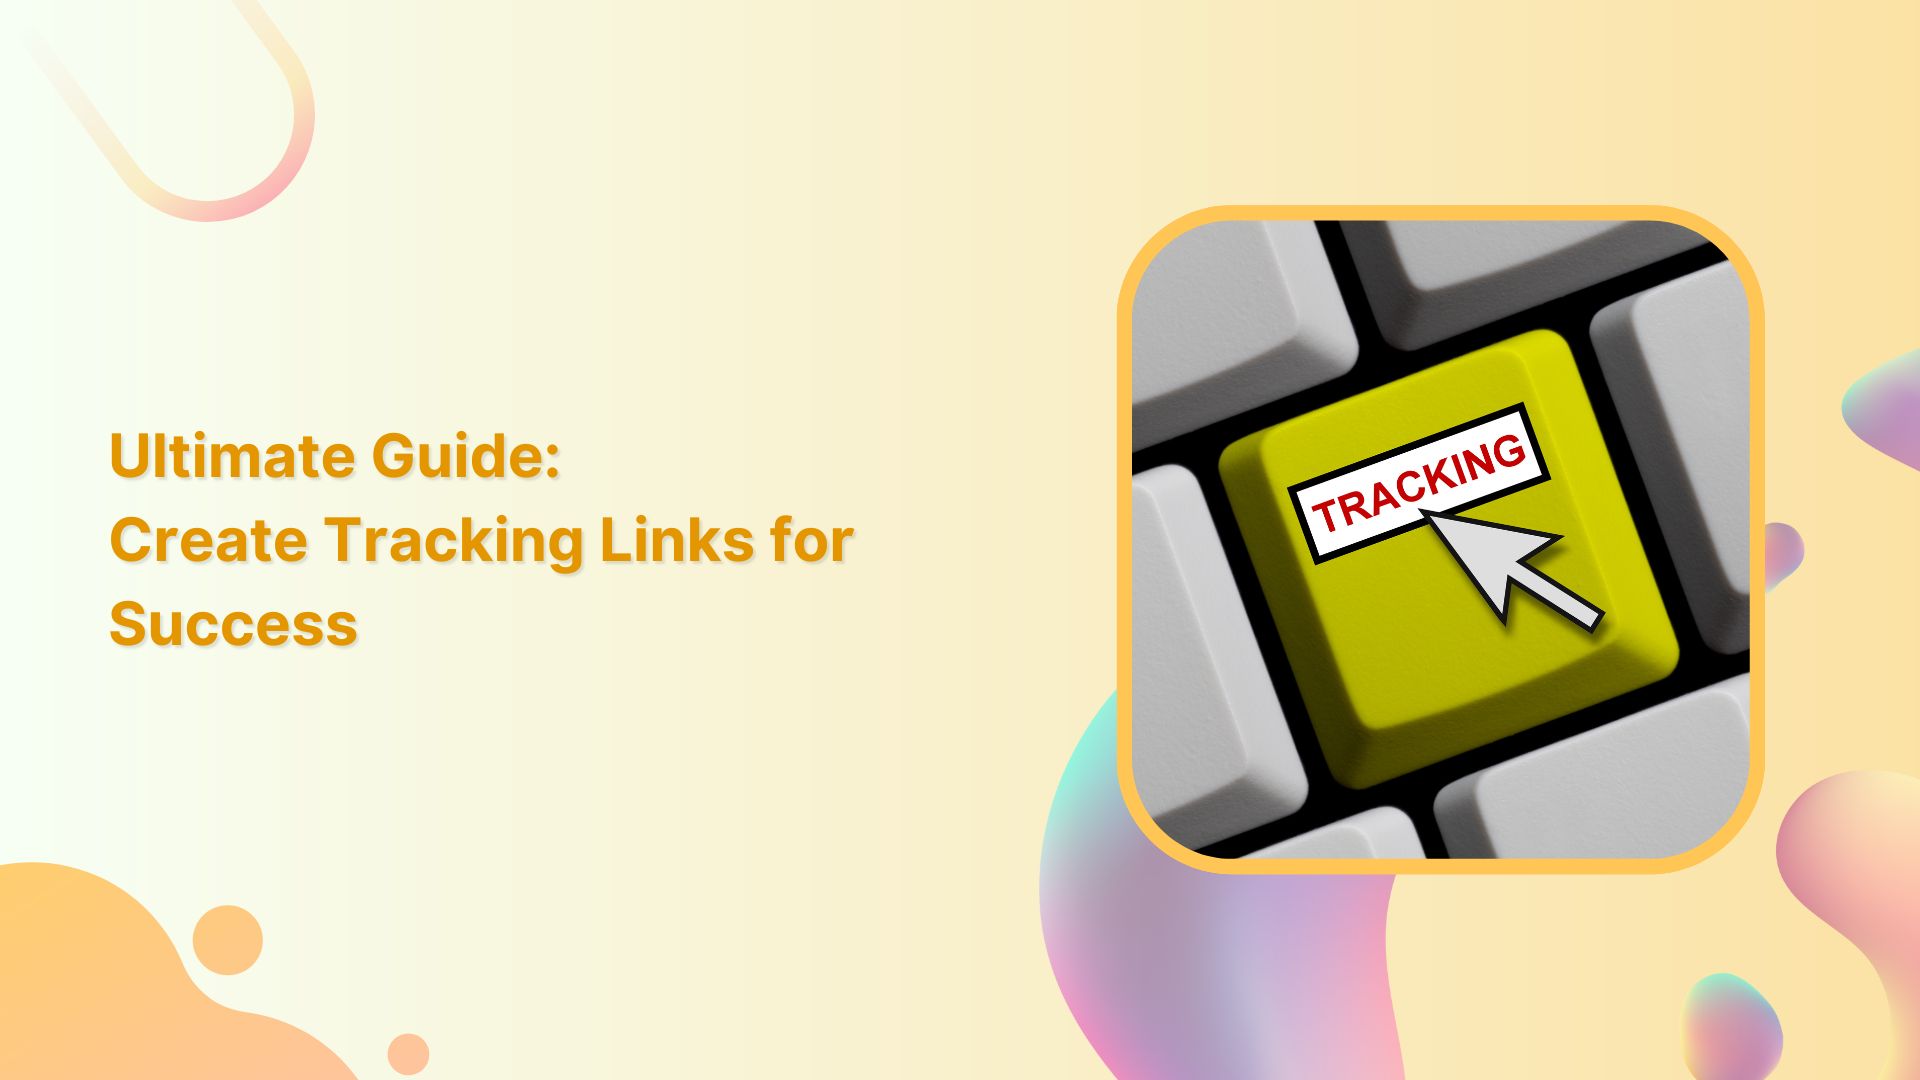 Ultimate Guide: Create Tracking Links for Success